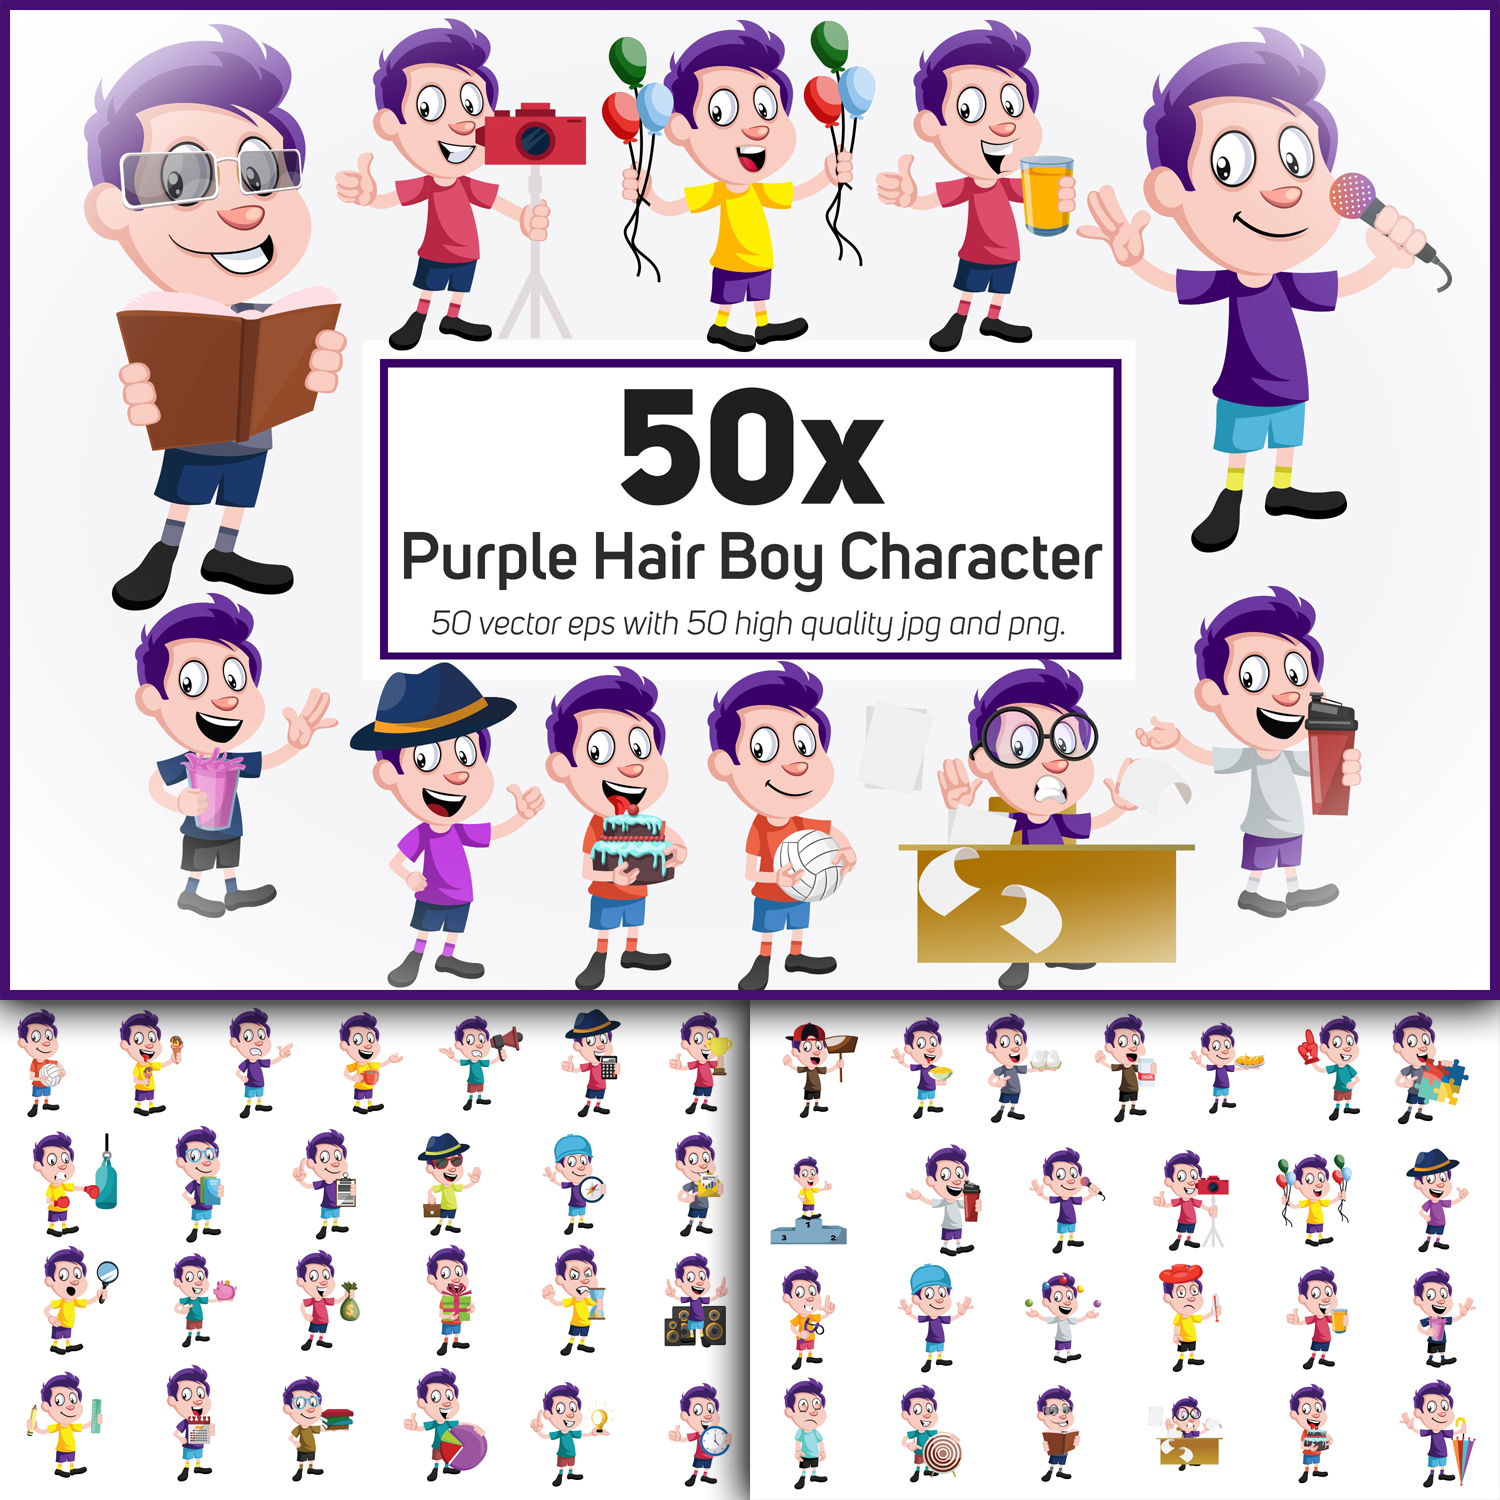 50x Purple Hair Boy Character and Daily Life action.